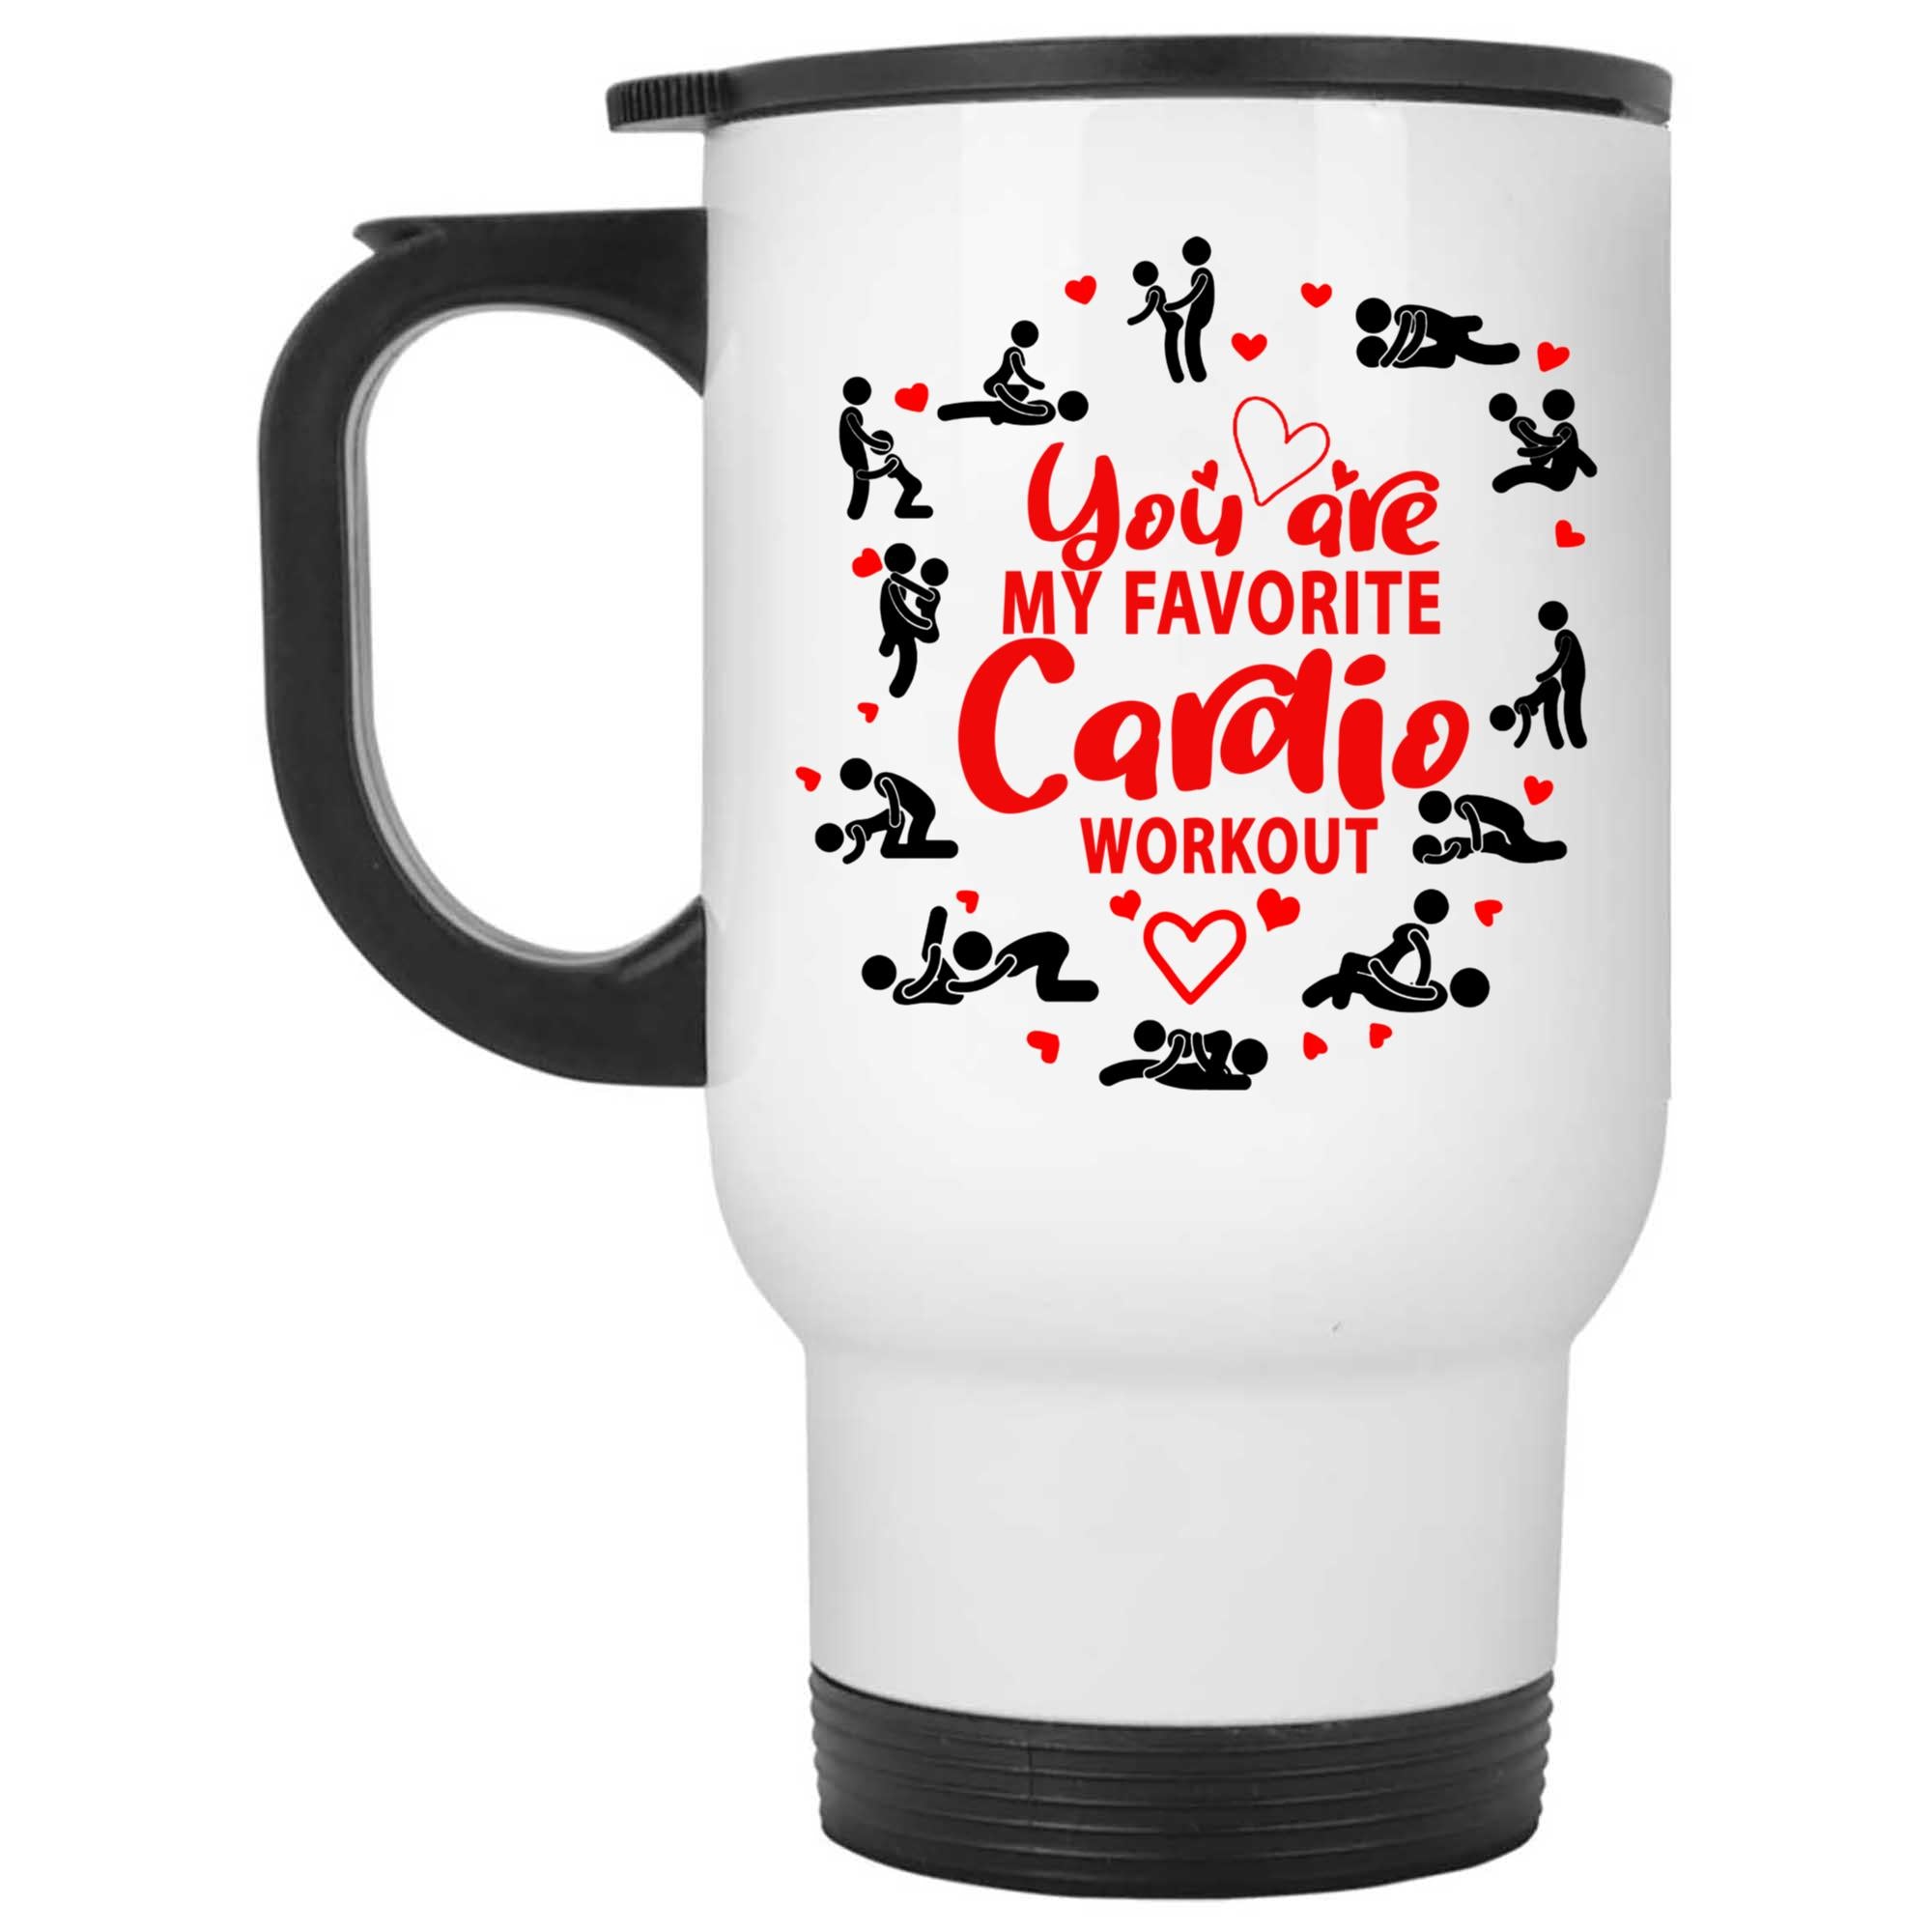 Skitongifts Coffee Mug Funny Ceramic Novelty You're My Favorite Cardio Workout YWUvNqa